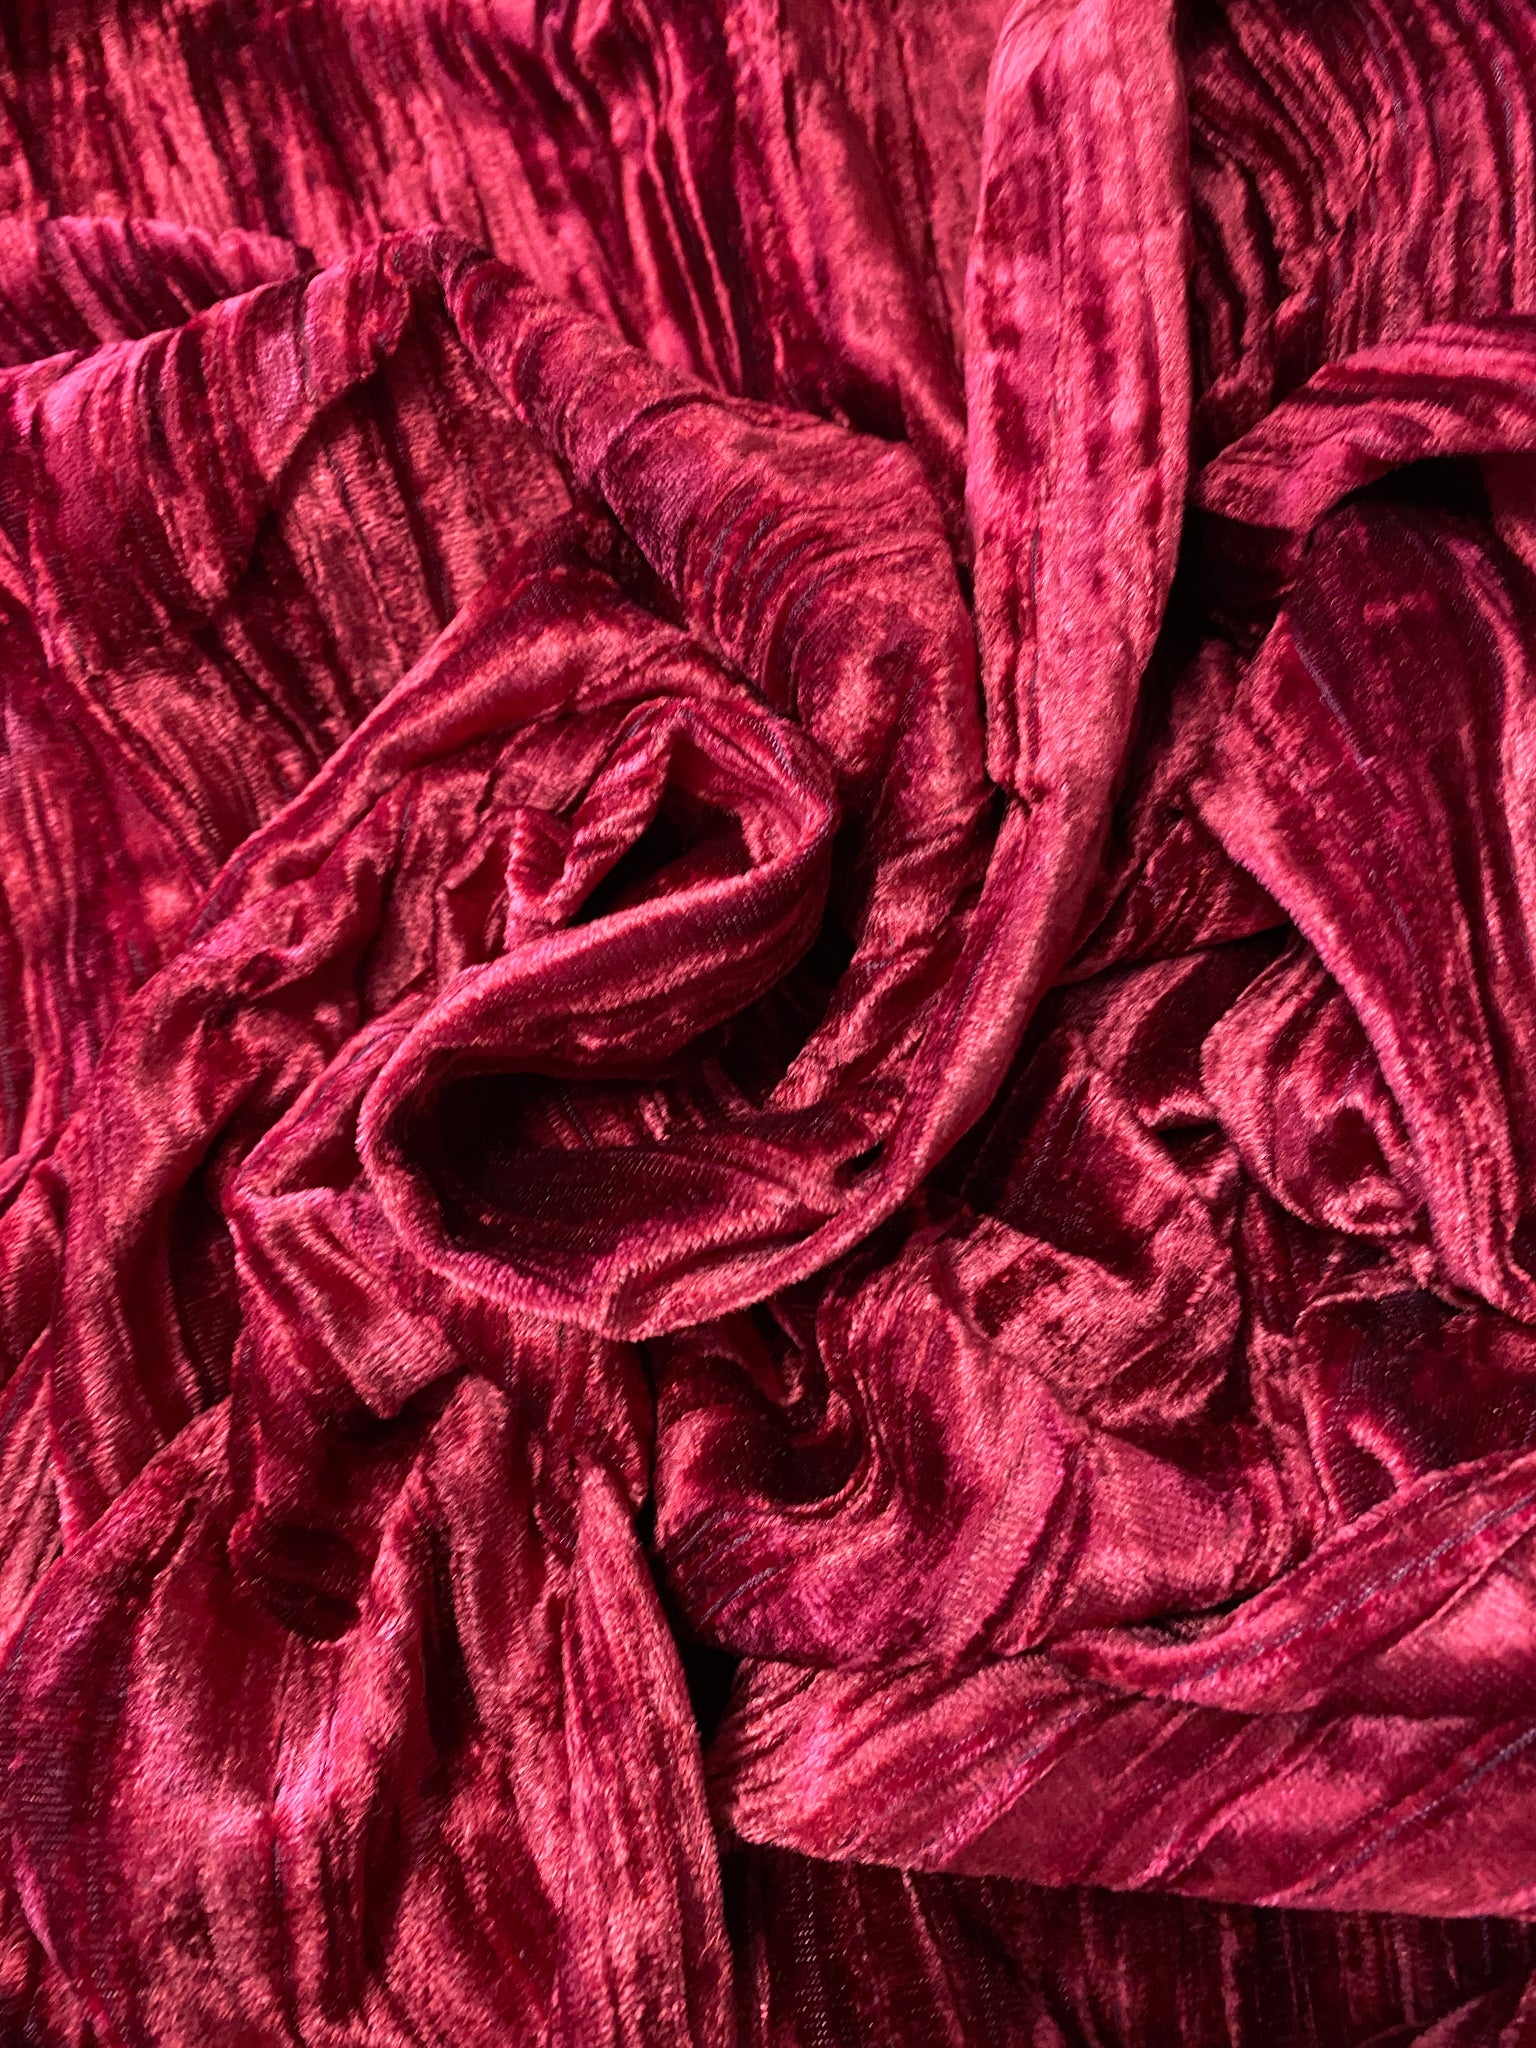 Ruby Red Vintage Crushed Velvet Fabric One piece 3+ yards